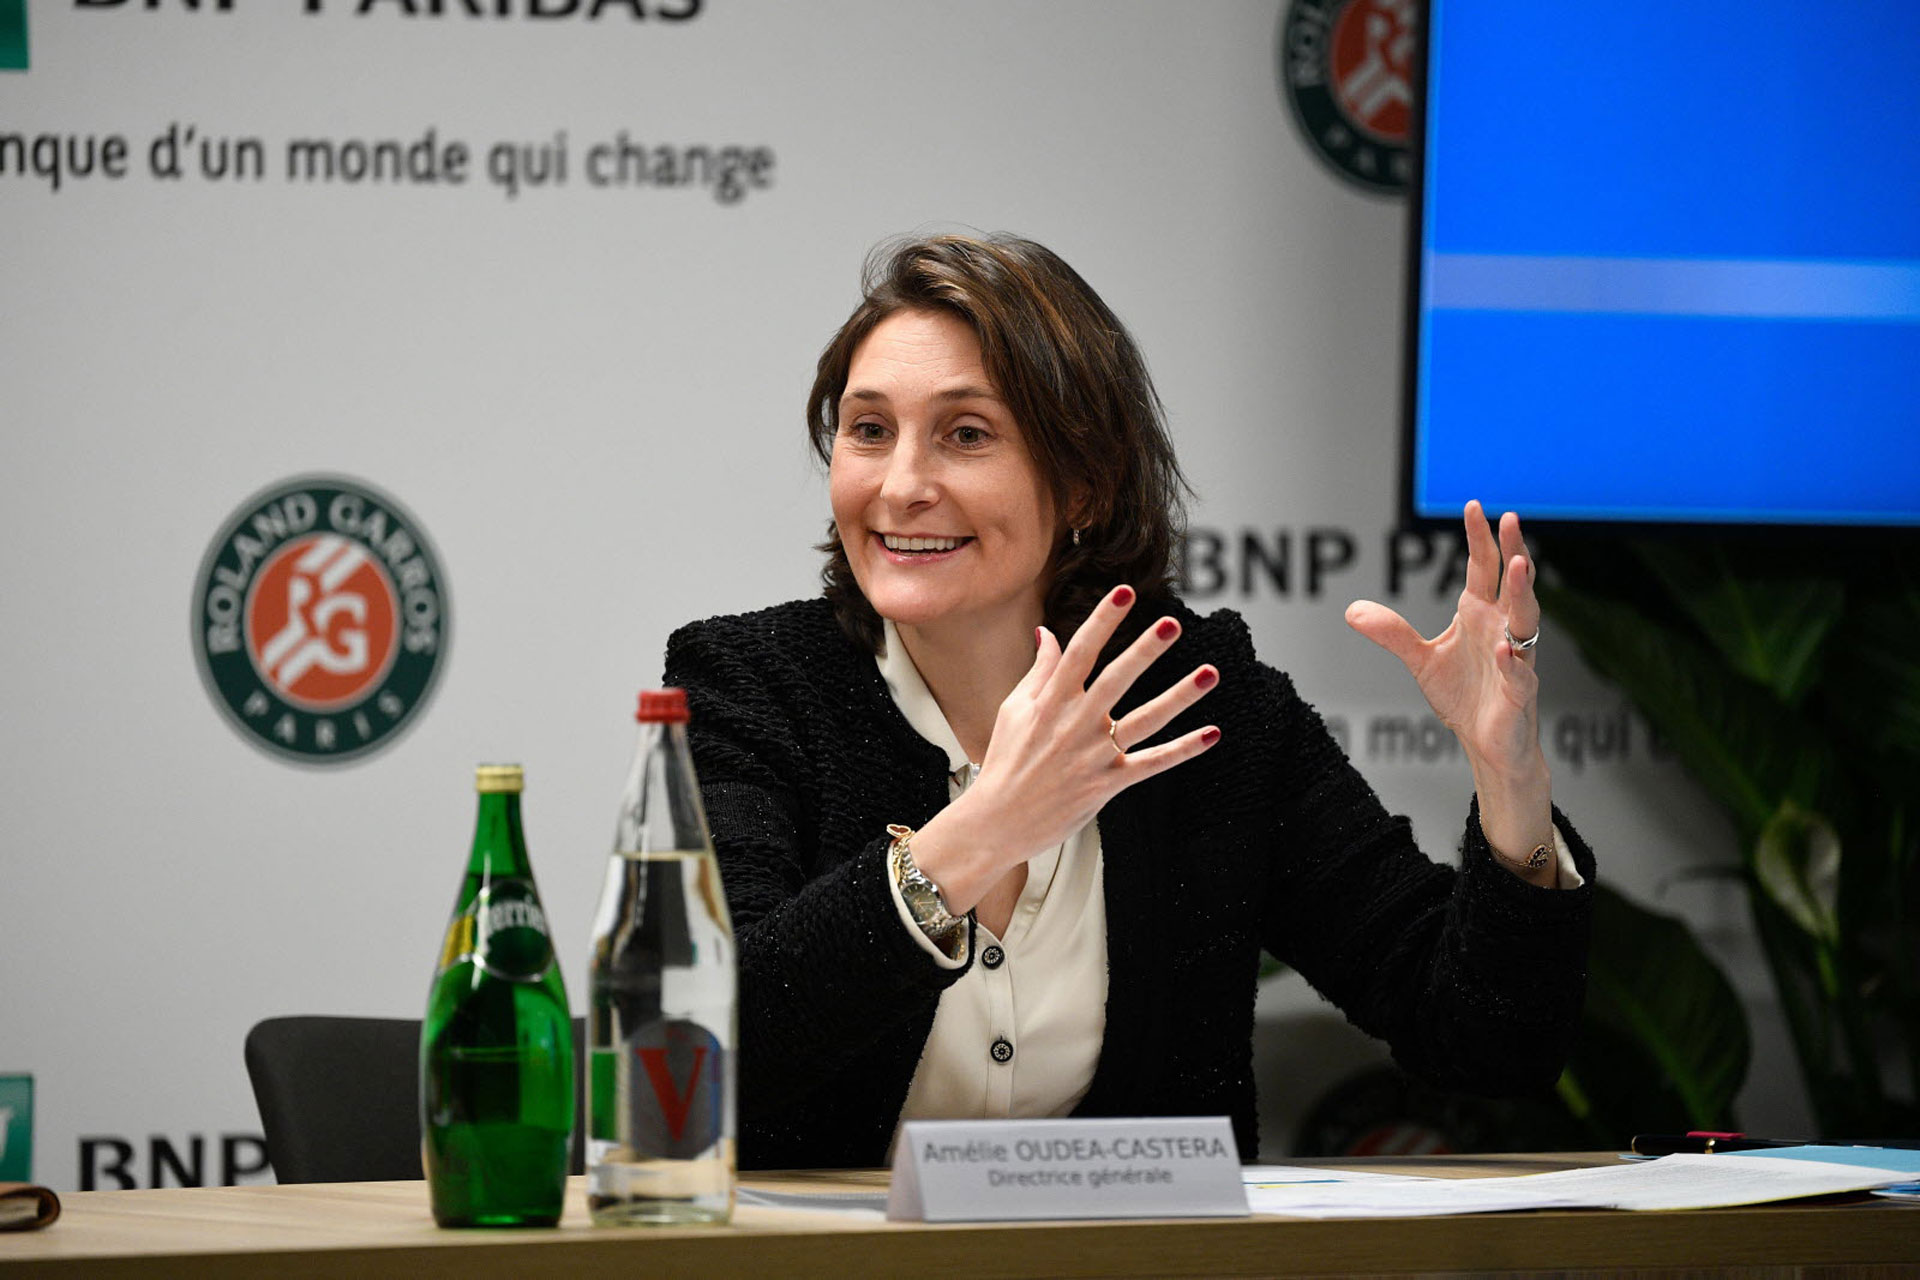 Amélie Oudéa-Castera, Minister of Sports and the Olympic and Paralympic Games of France